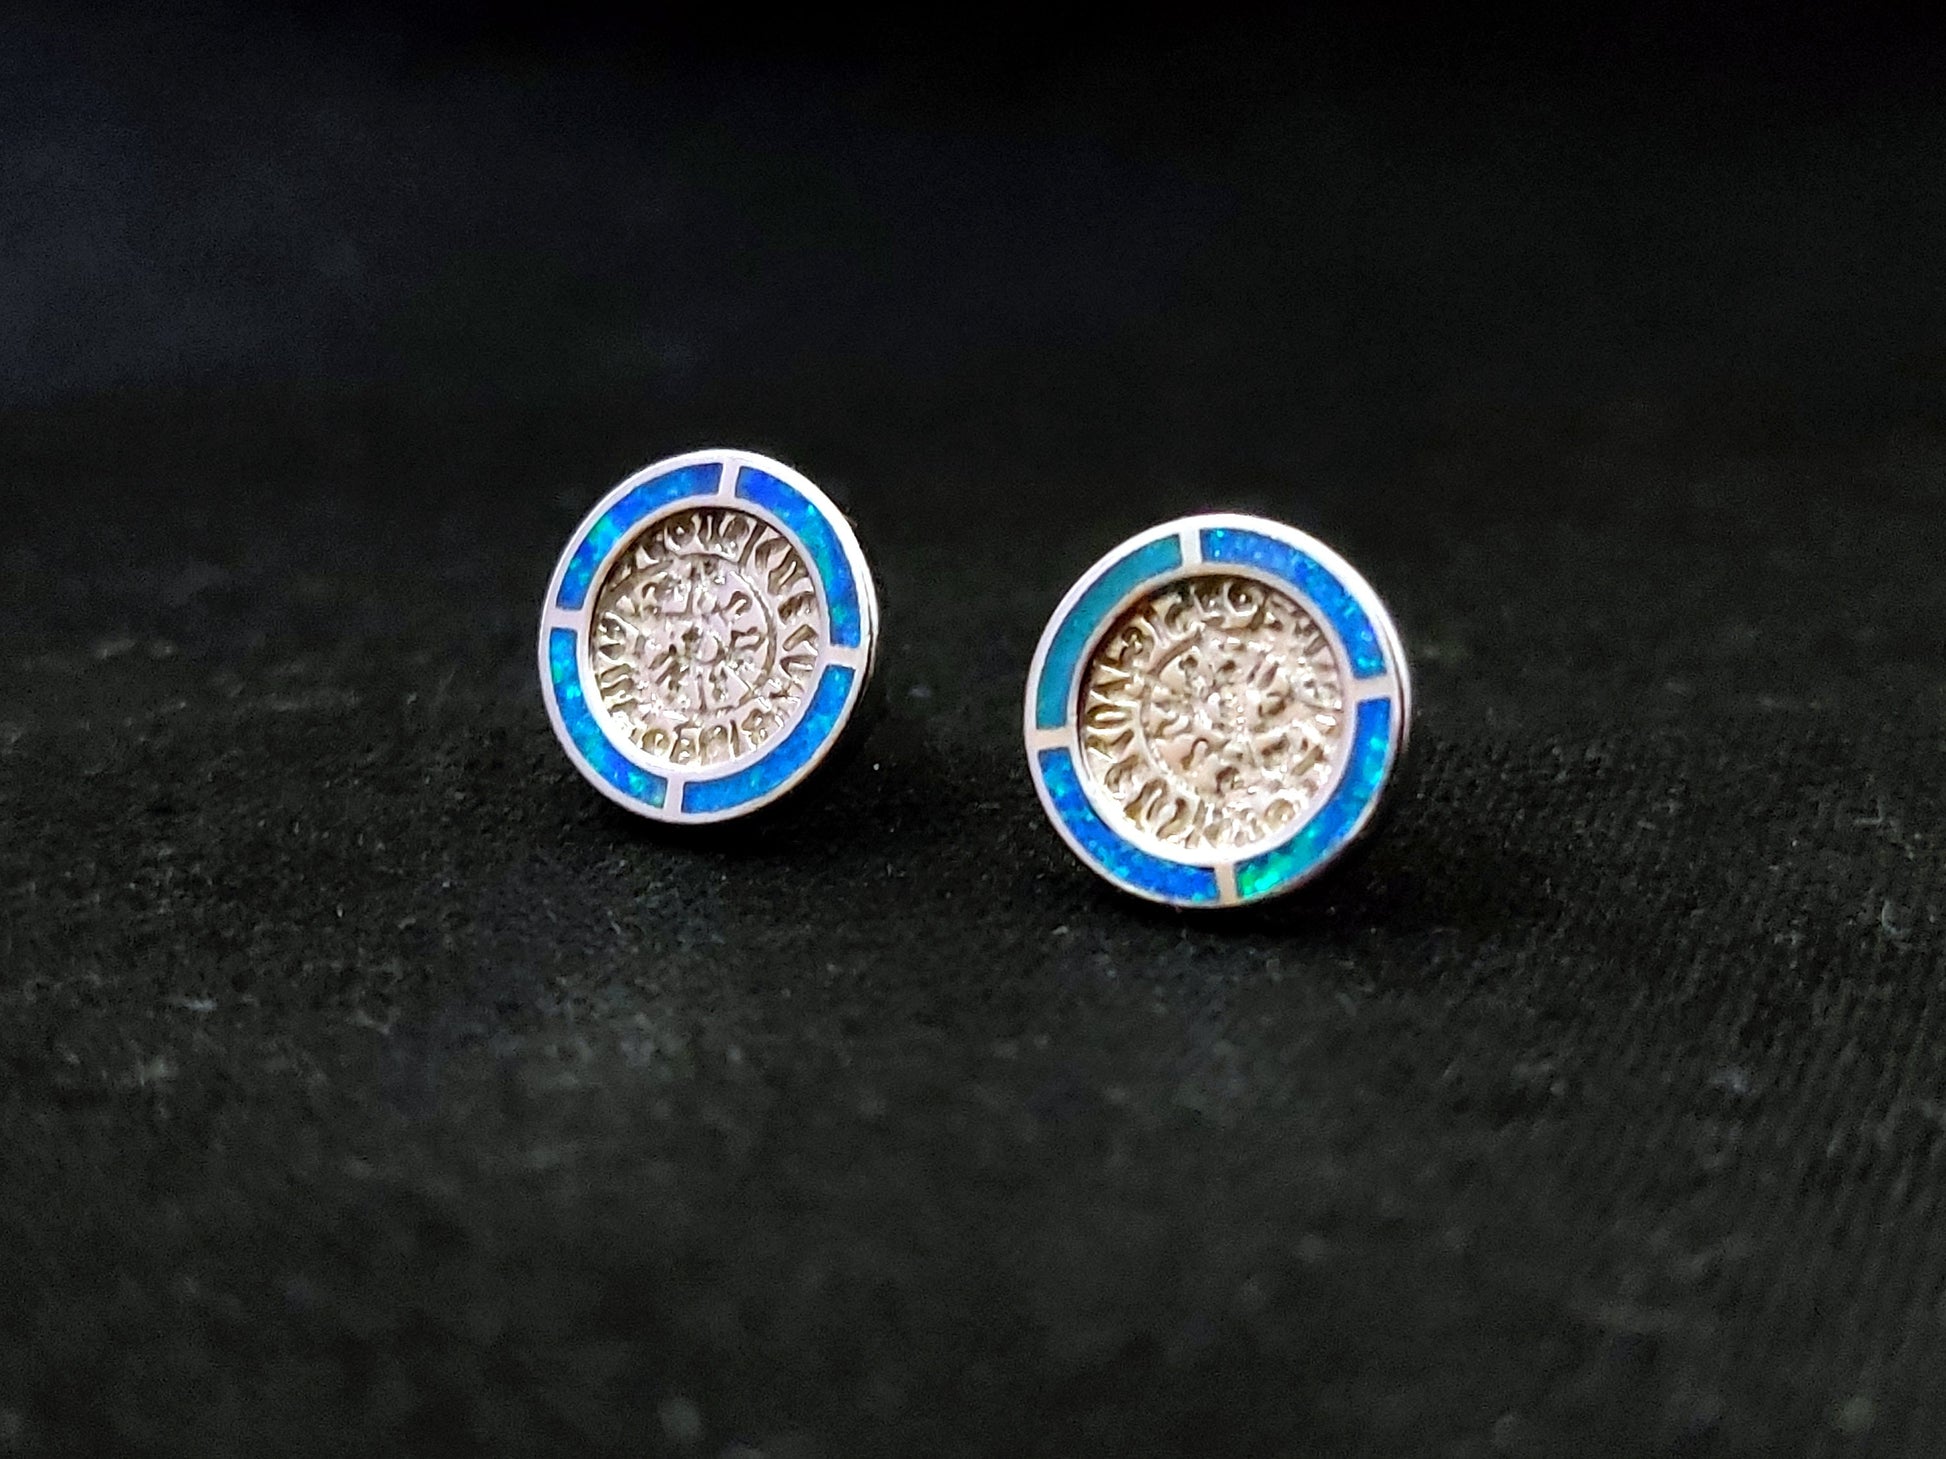 Phaistos Disc silver Greek stud round earrings with blue opal stones measuring 11mm diameter.